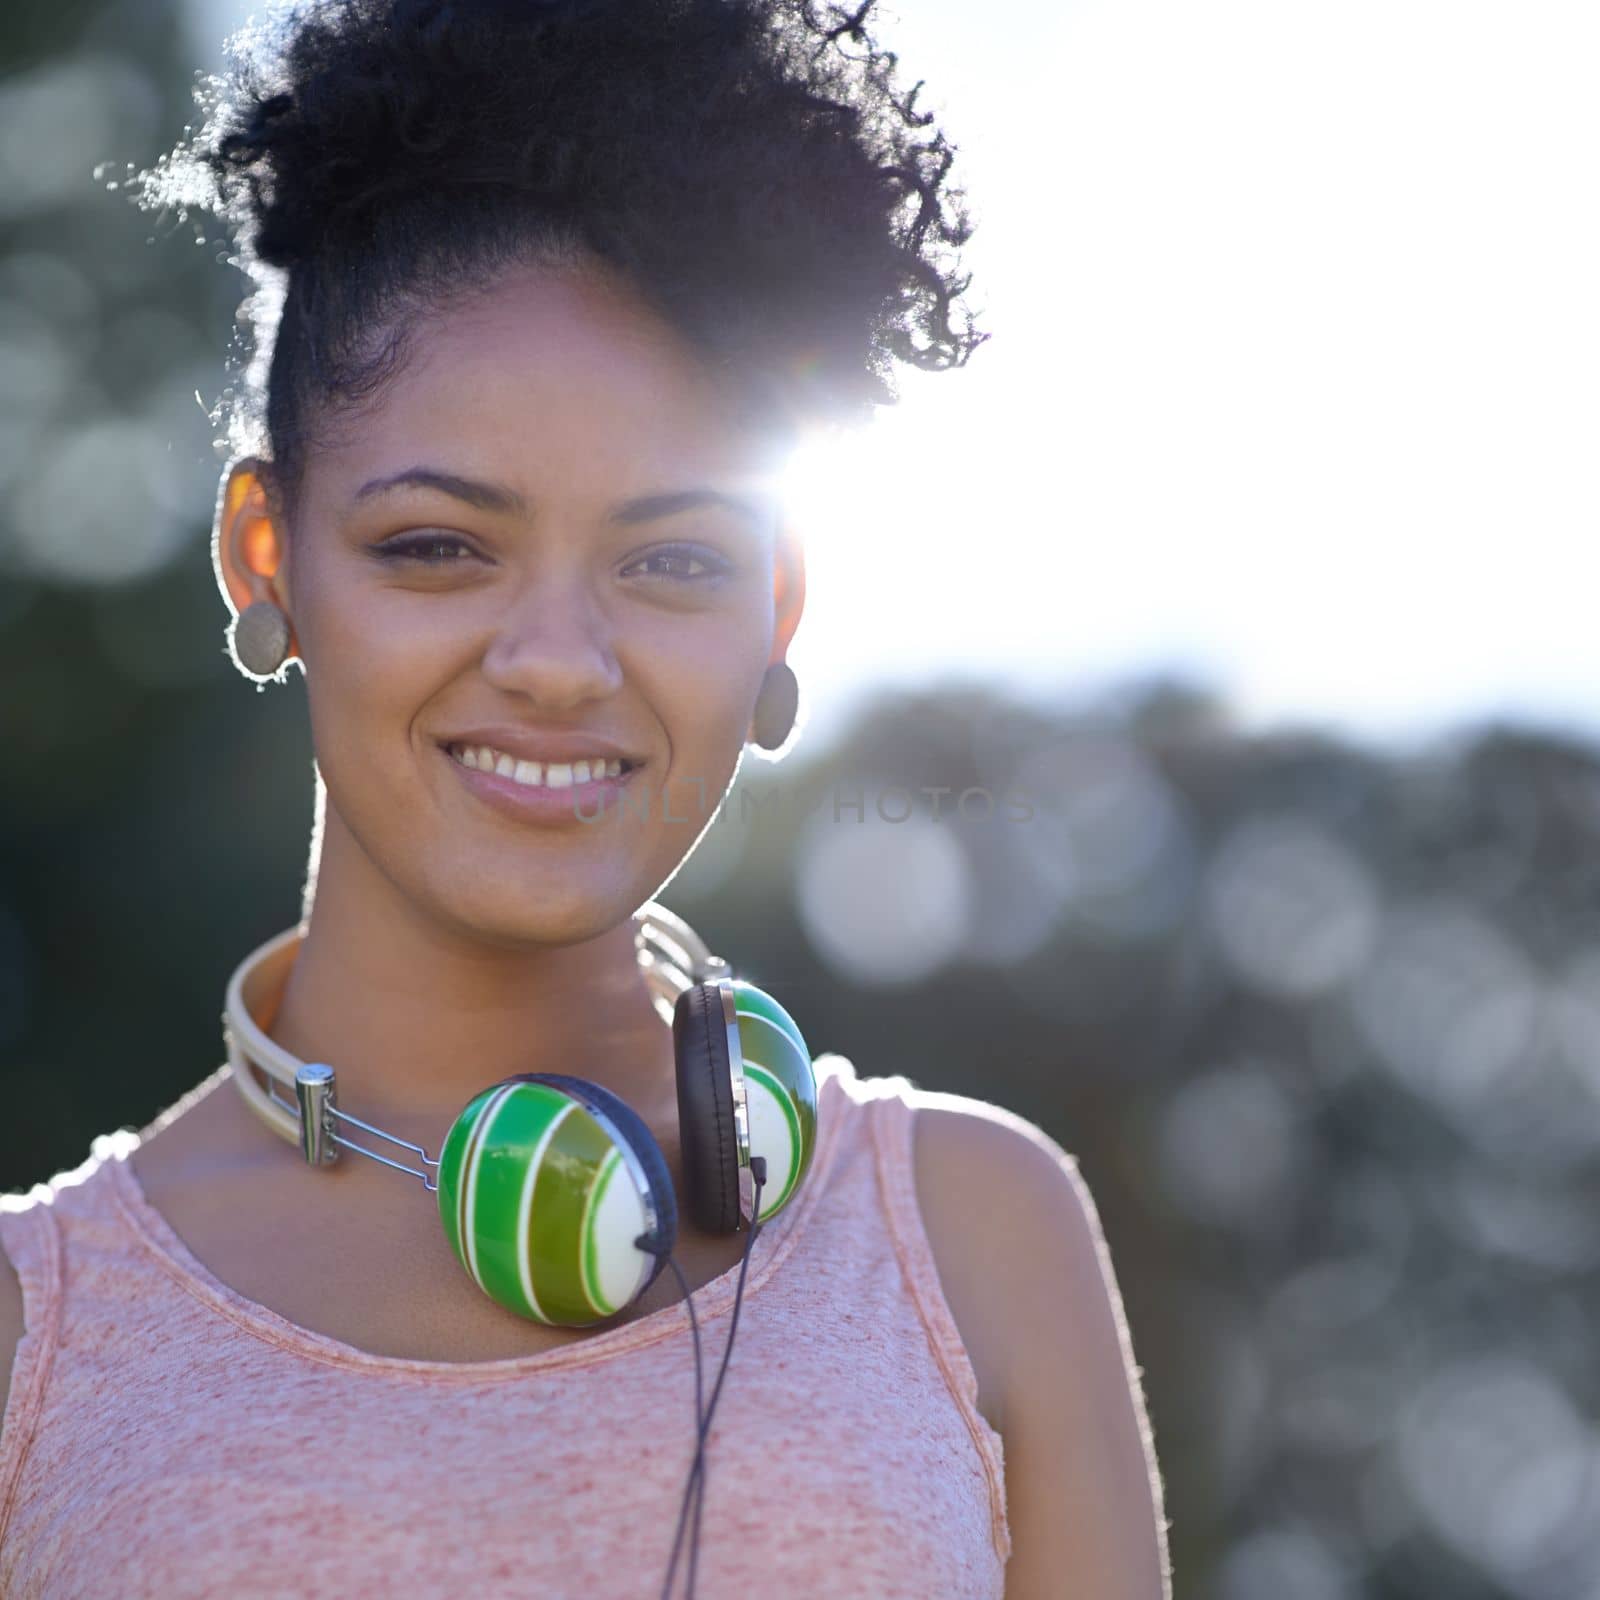 Take the music with you. Portrait of a pretty student in the outdoors with headphones around her neck